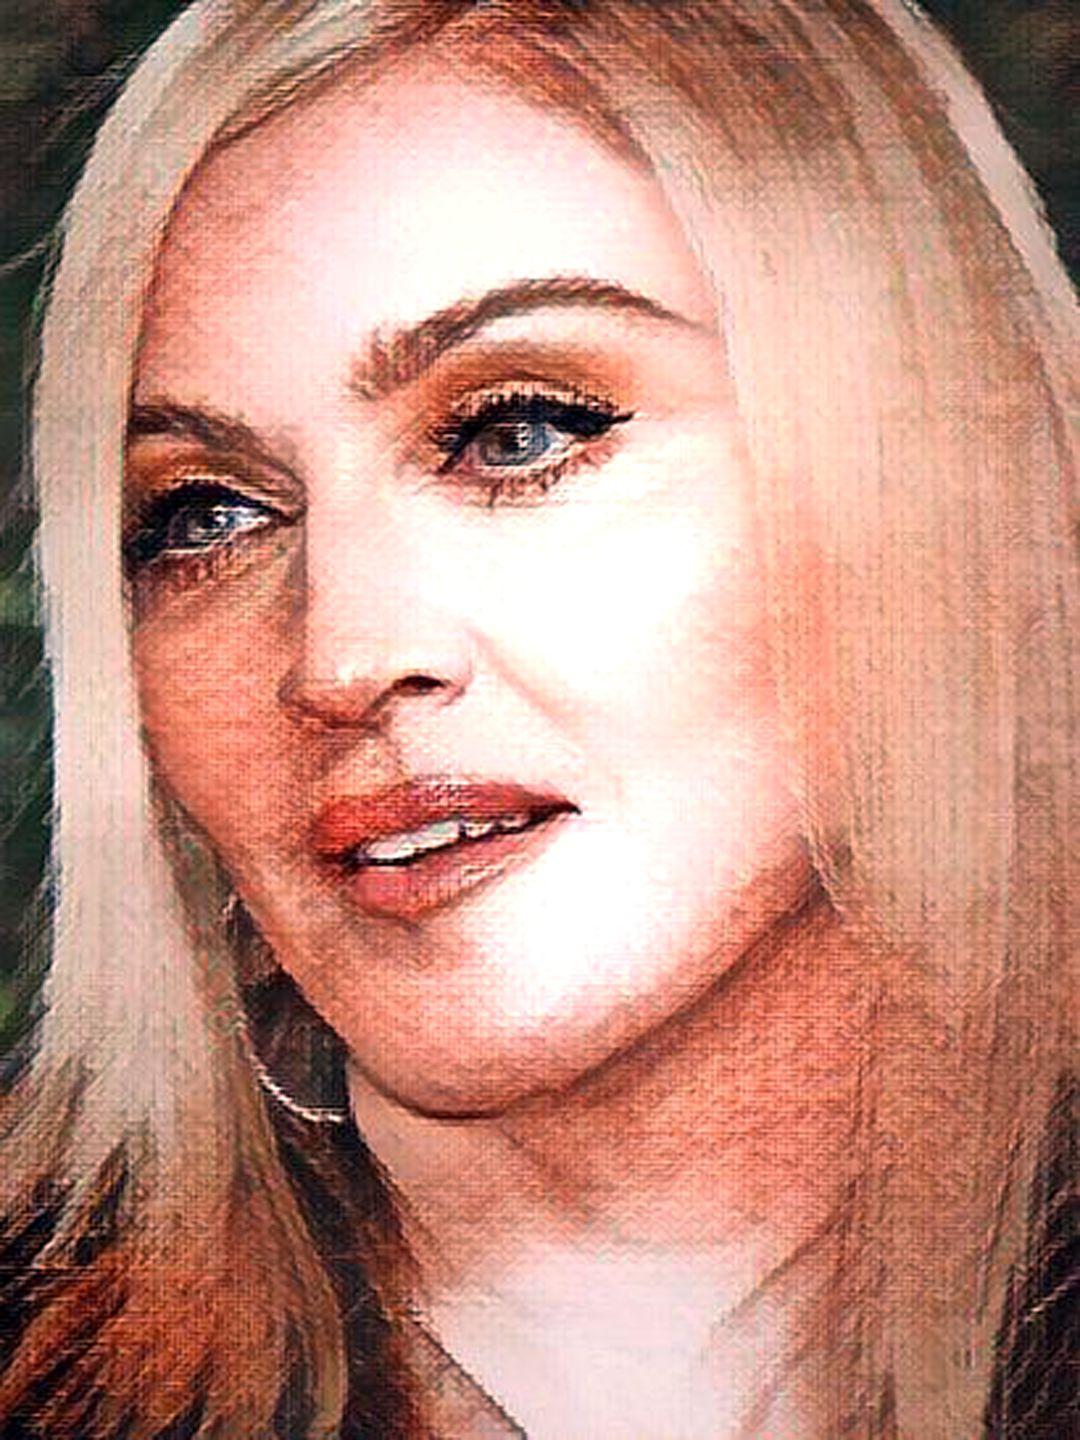 Amateur Nudism Ls - Madonna # 36 - Celeb ART - Beautiful Artworks of Celebrities, Footballers,  Politicians and Famous People in World | OpenSea